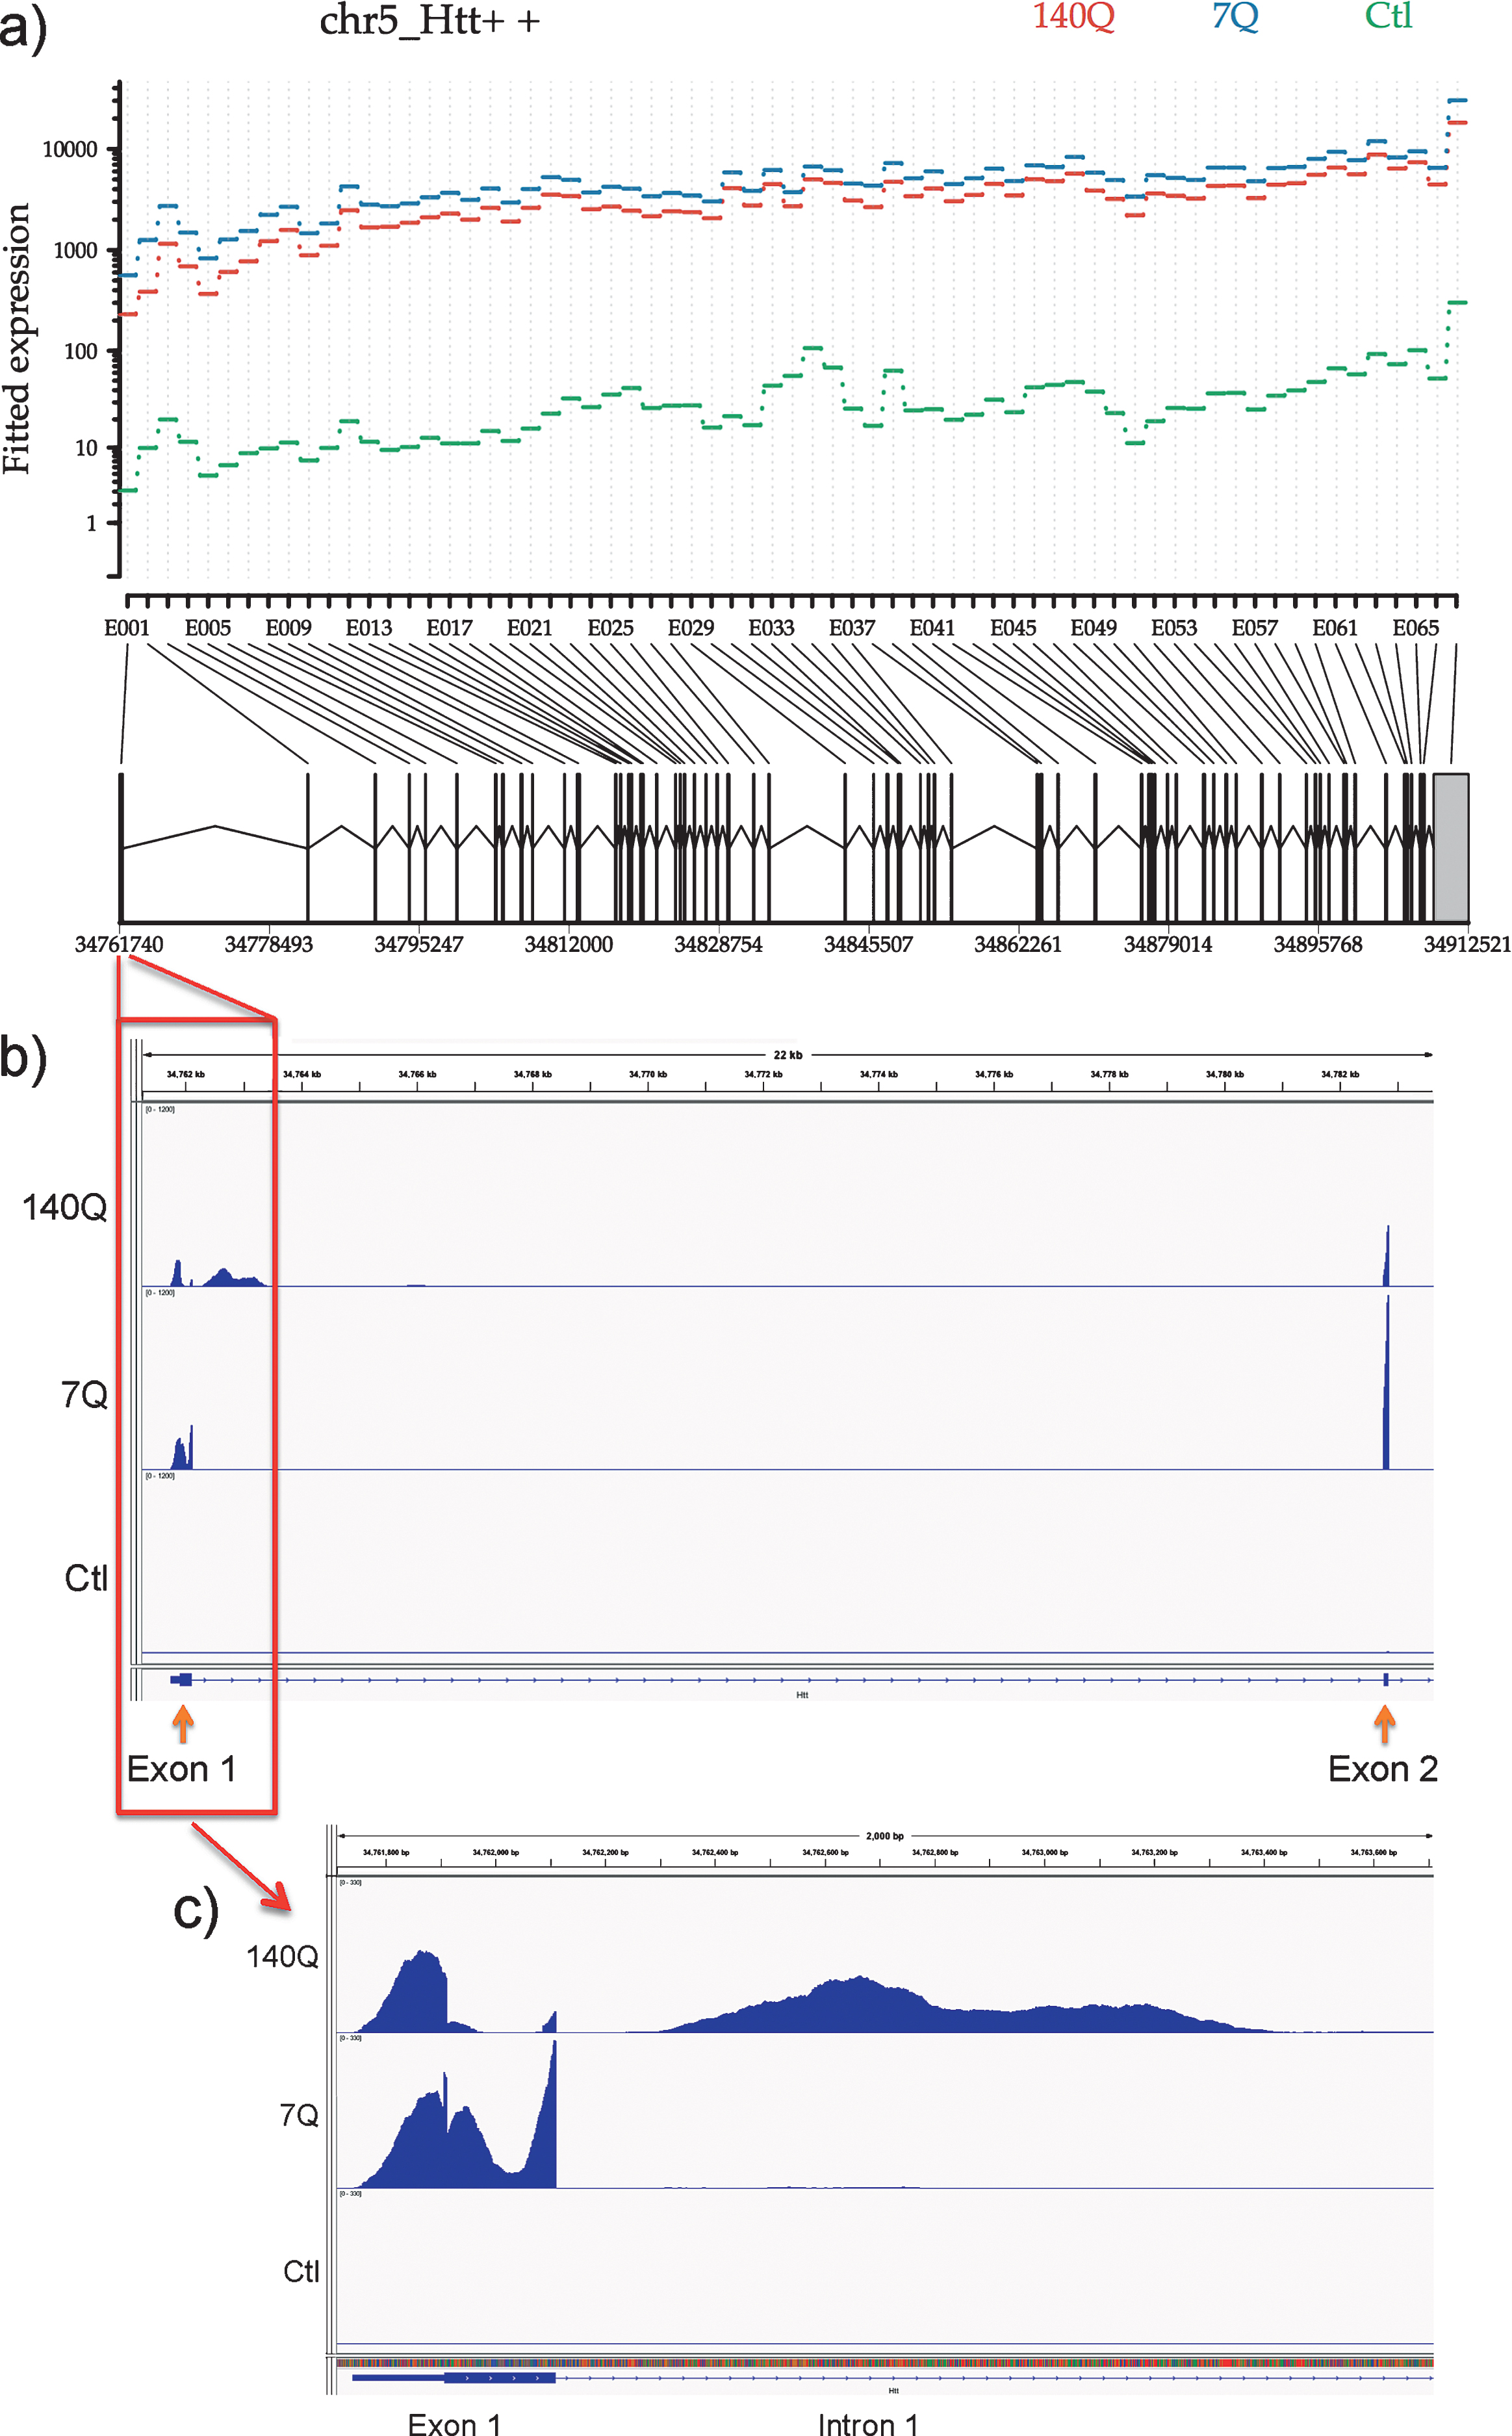 RNA-Seq analysis of Htt immunoprecipitates reveals full-length Htt mRNA and mutant Htt-specific aberrantly spliced Htt mRNA associated with Htt protein. a) Differential expression of Htt exons. The plot shows the fitted expression values of each of the exons of Htt for each of the three conditions based on estimated dispersions as calculated by the statistical method DEXSeq. b) Read coverage for Htt exon 1, intron 1, and exon 2. Coverage was normalized relative to the total number of mapped reads for each sample. Same scale was used for graphing all samples to illustrate relative expression levels. c) Read coverage for Htt exon 1, and the beginning of intron 1. Coverage was normalized relative to the total number of mapped reads for each sample. Same scale was used for graphing all samples to illustrate relative expression levels.